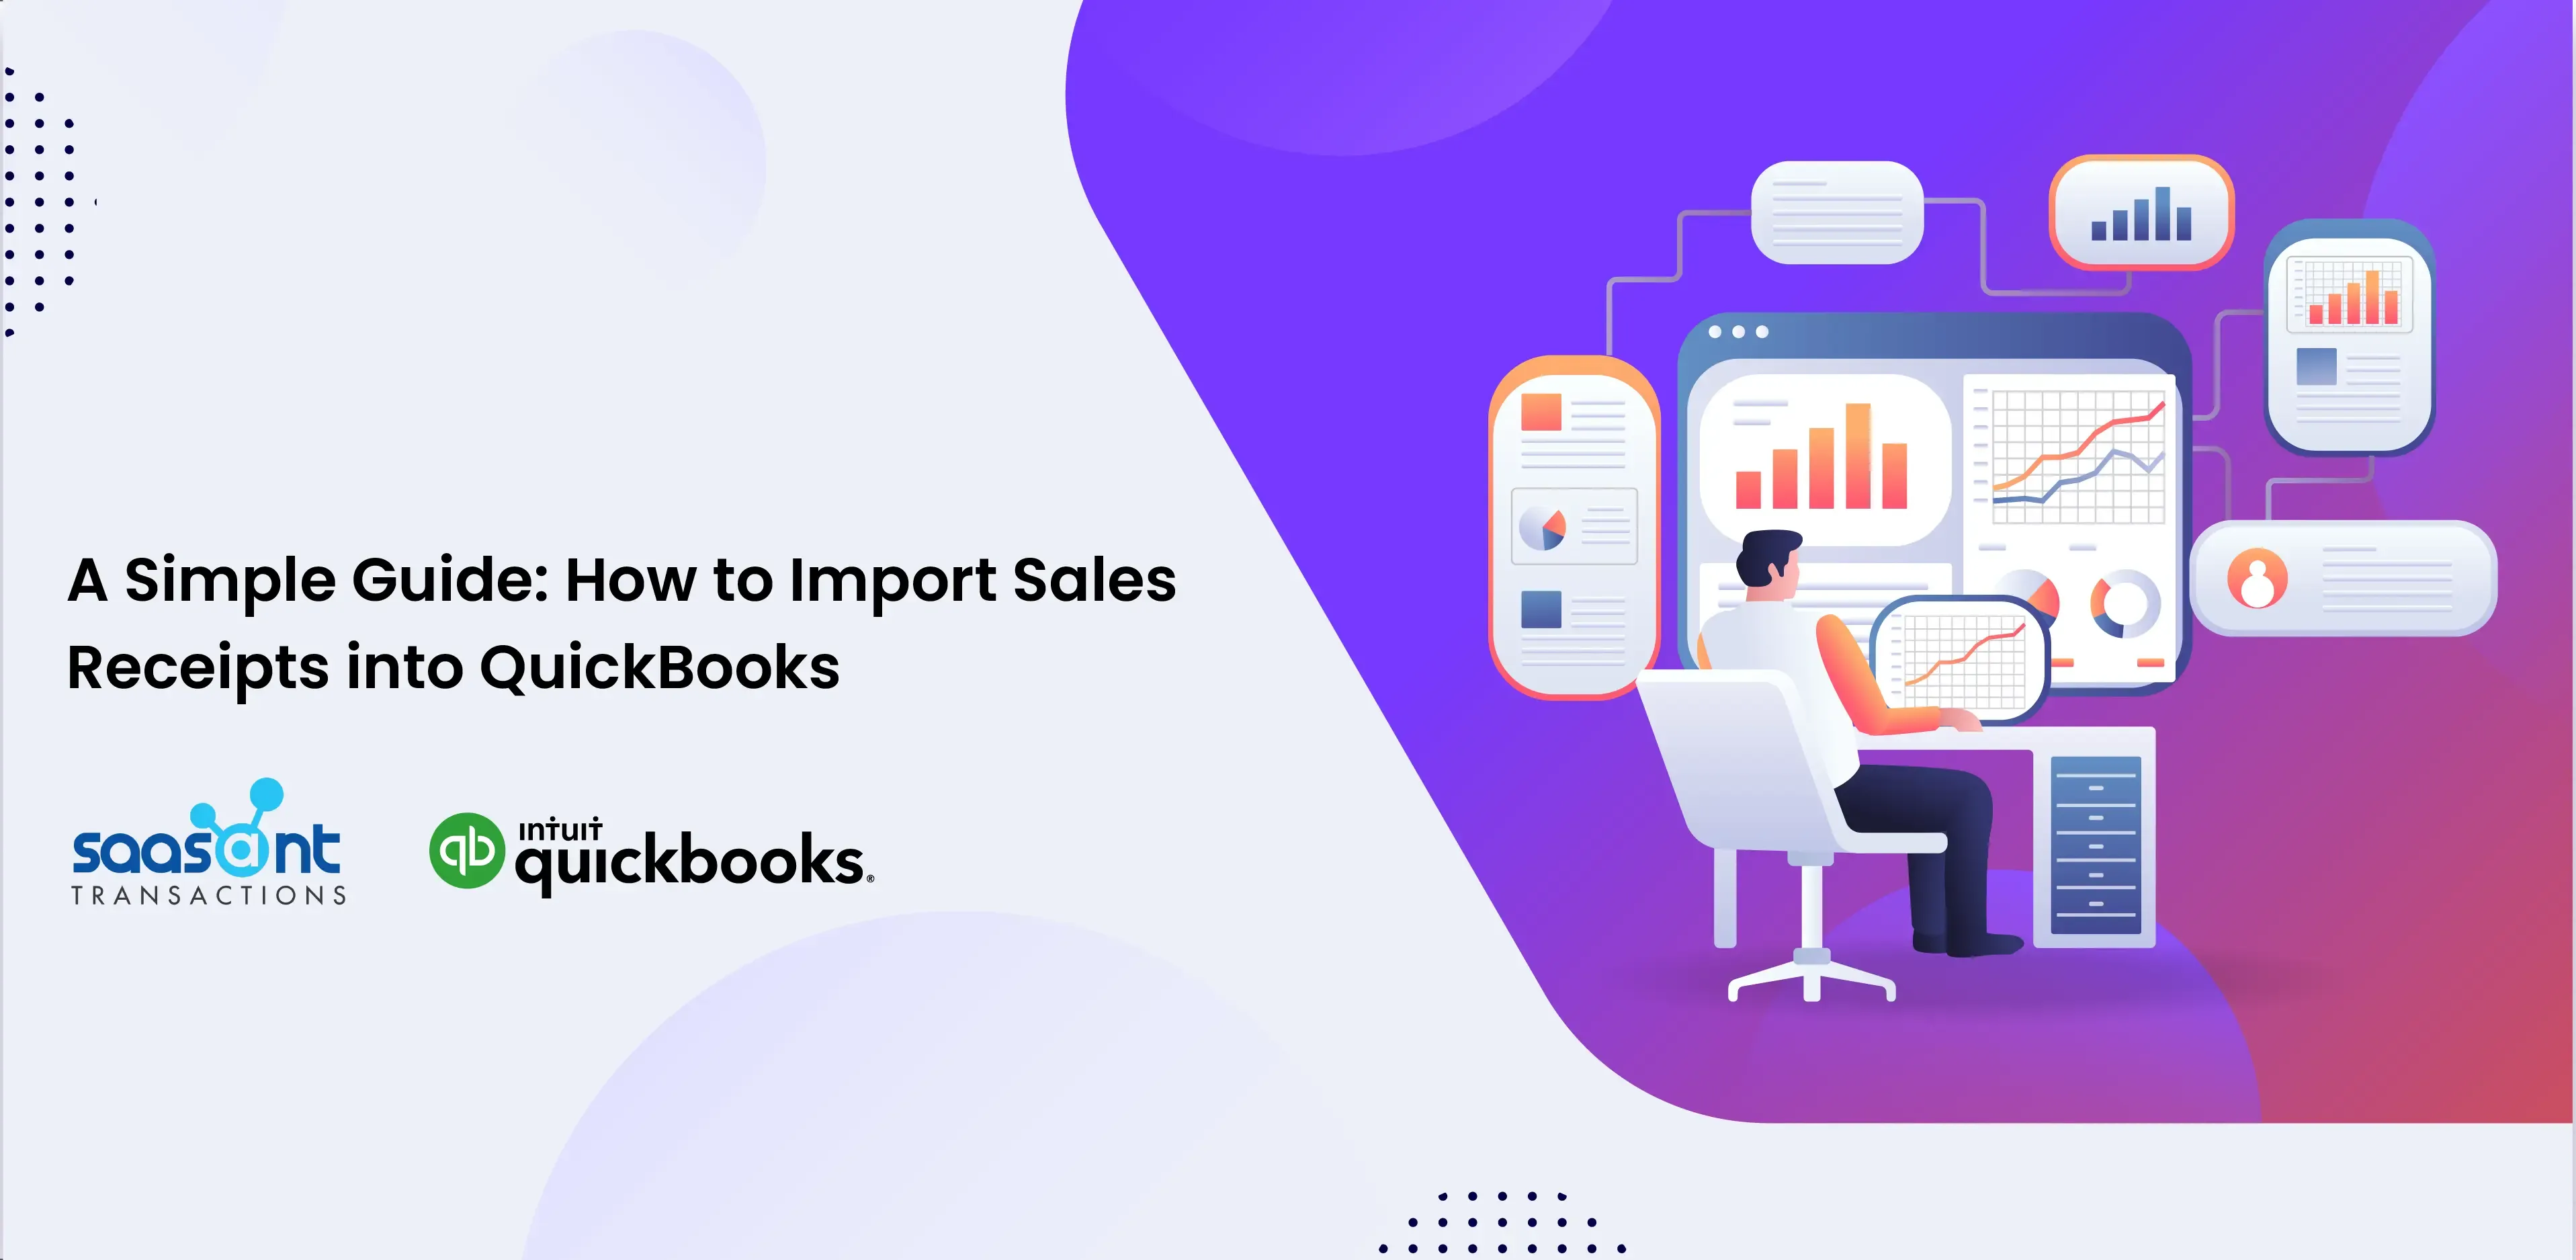 blog_images1703128898553_A-Simple-Guide-How-to-Import-Sales-Receipts-into-QuickBooks.webp